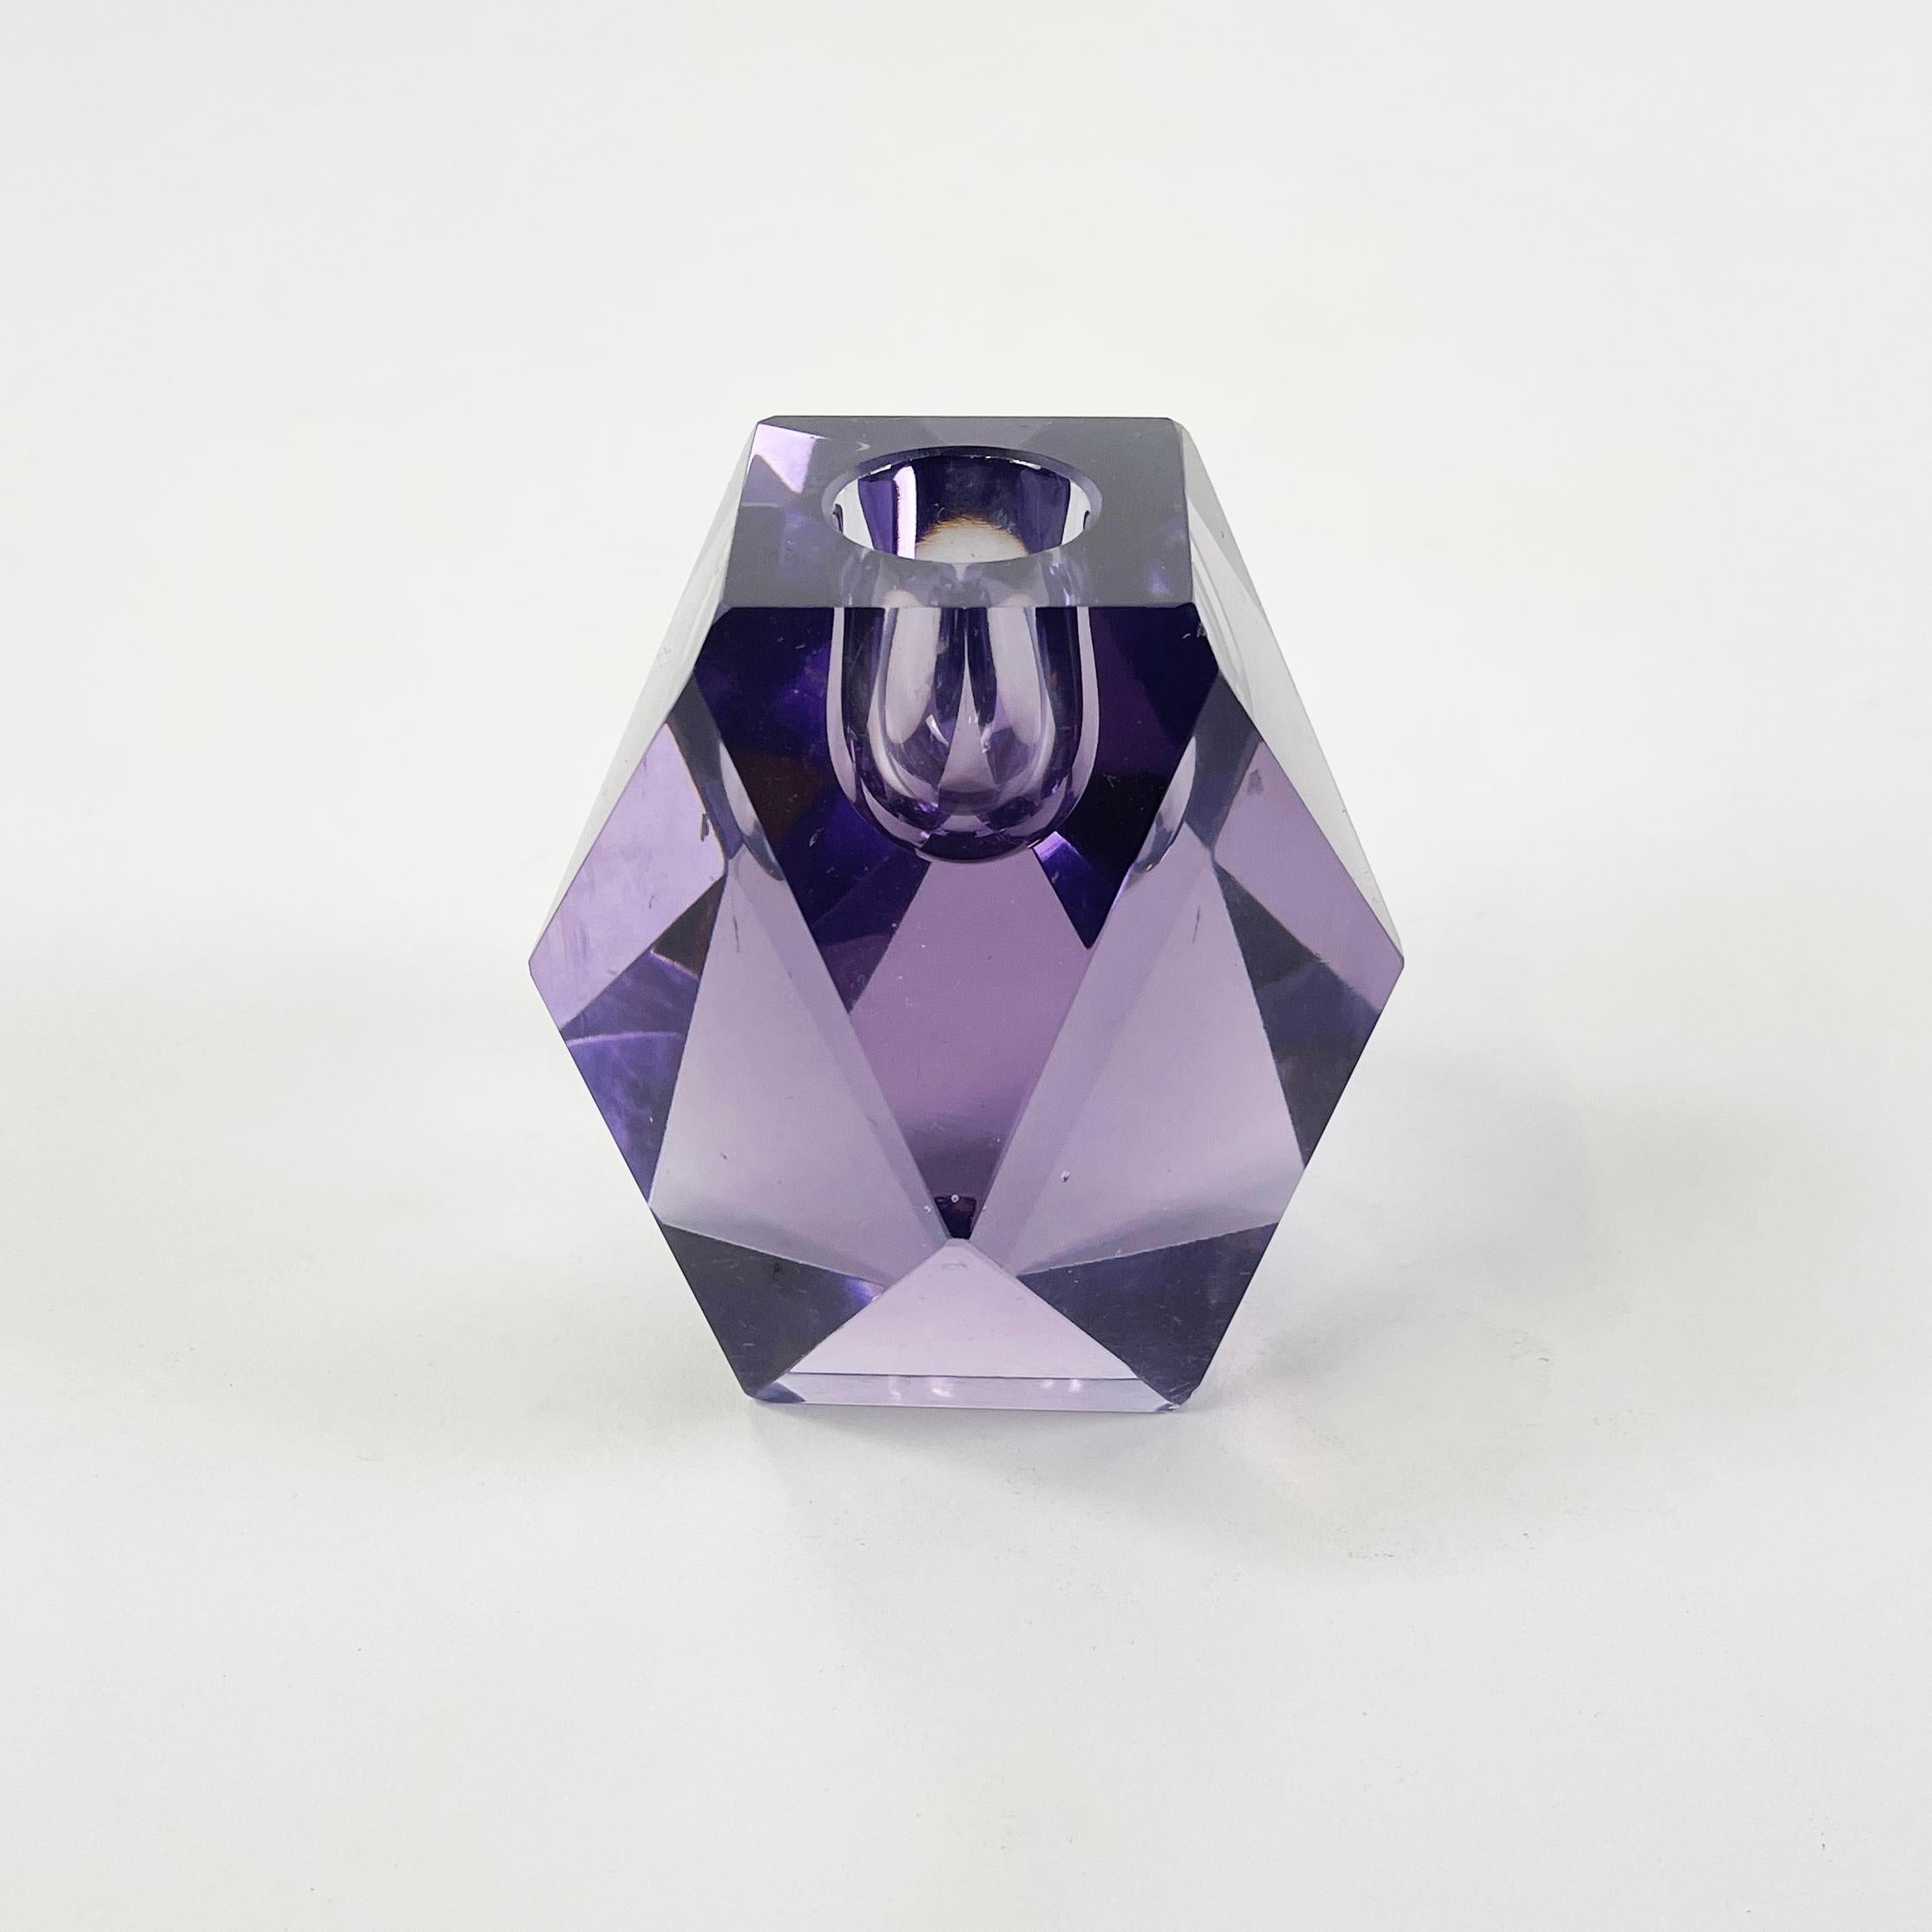 Italian Mid-Century modern Geometrical single flame candle holder in alexandrite, 1970s
Single flame candle holder with geometric polyhedral structure entirely of purple alexandrite.
1970 approx.
Good condition, light scratches.
Measurements in cm